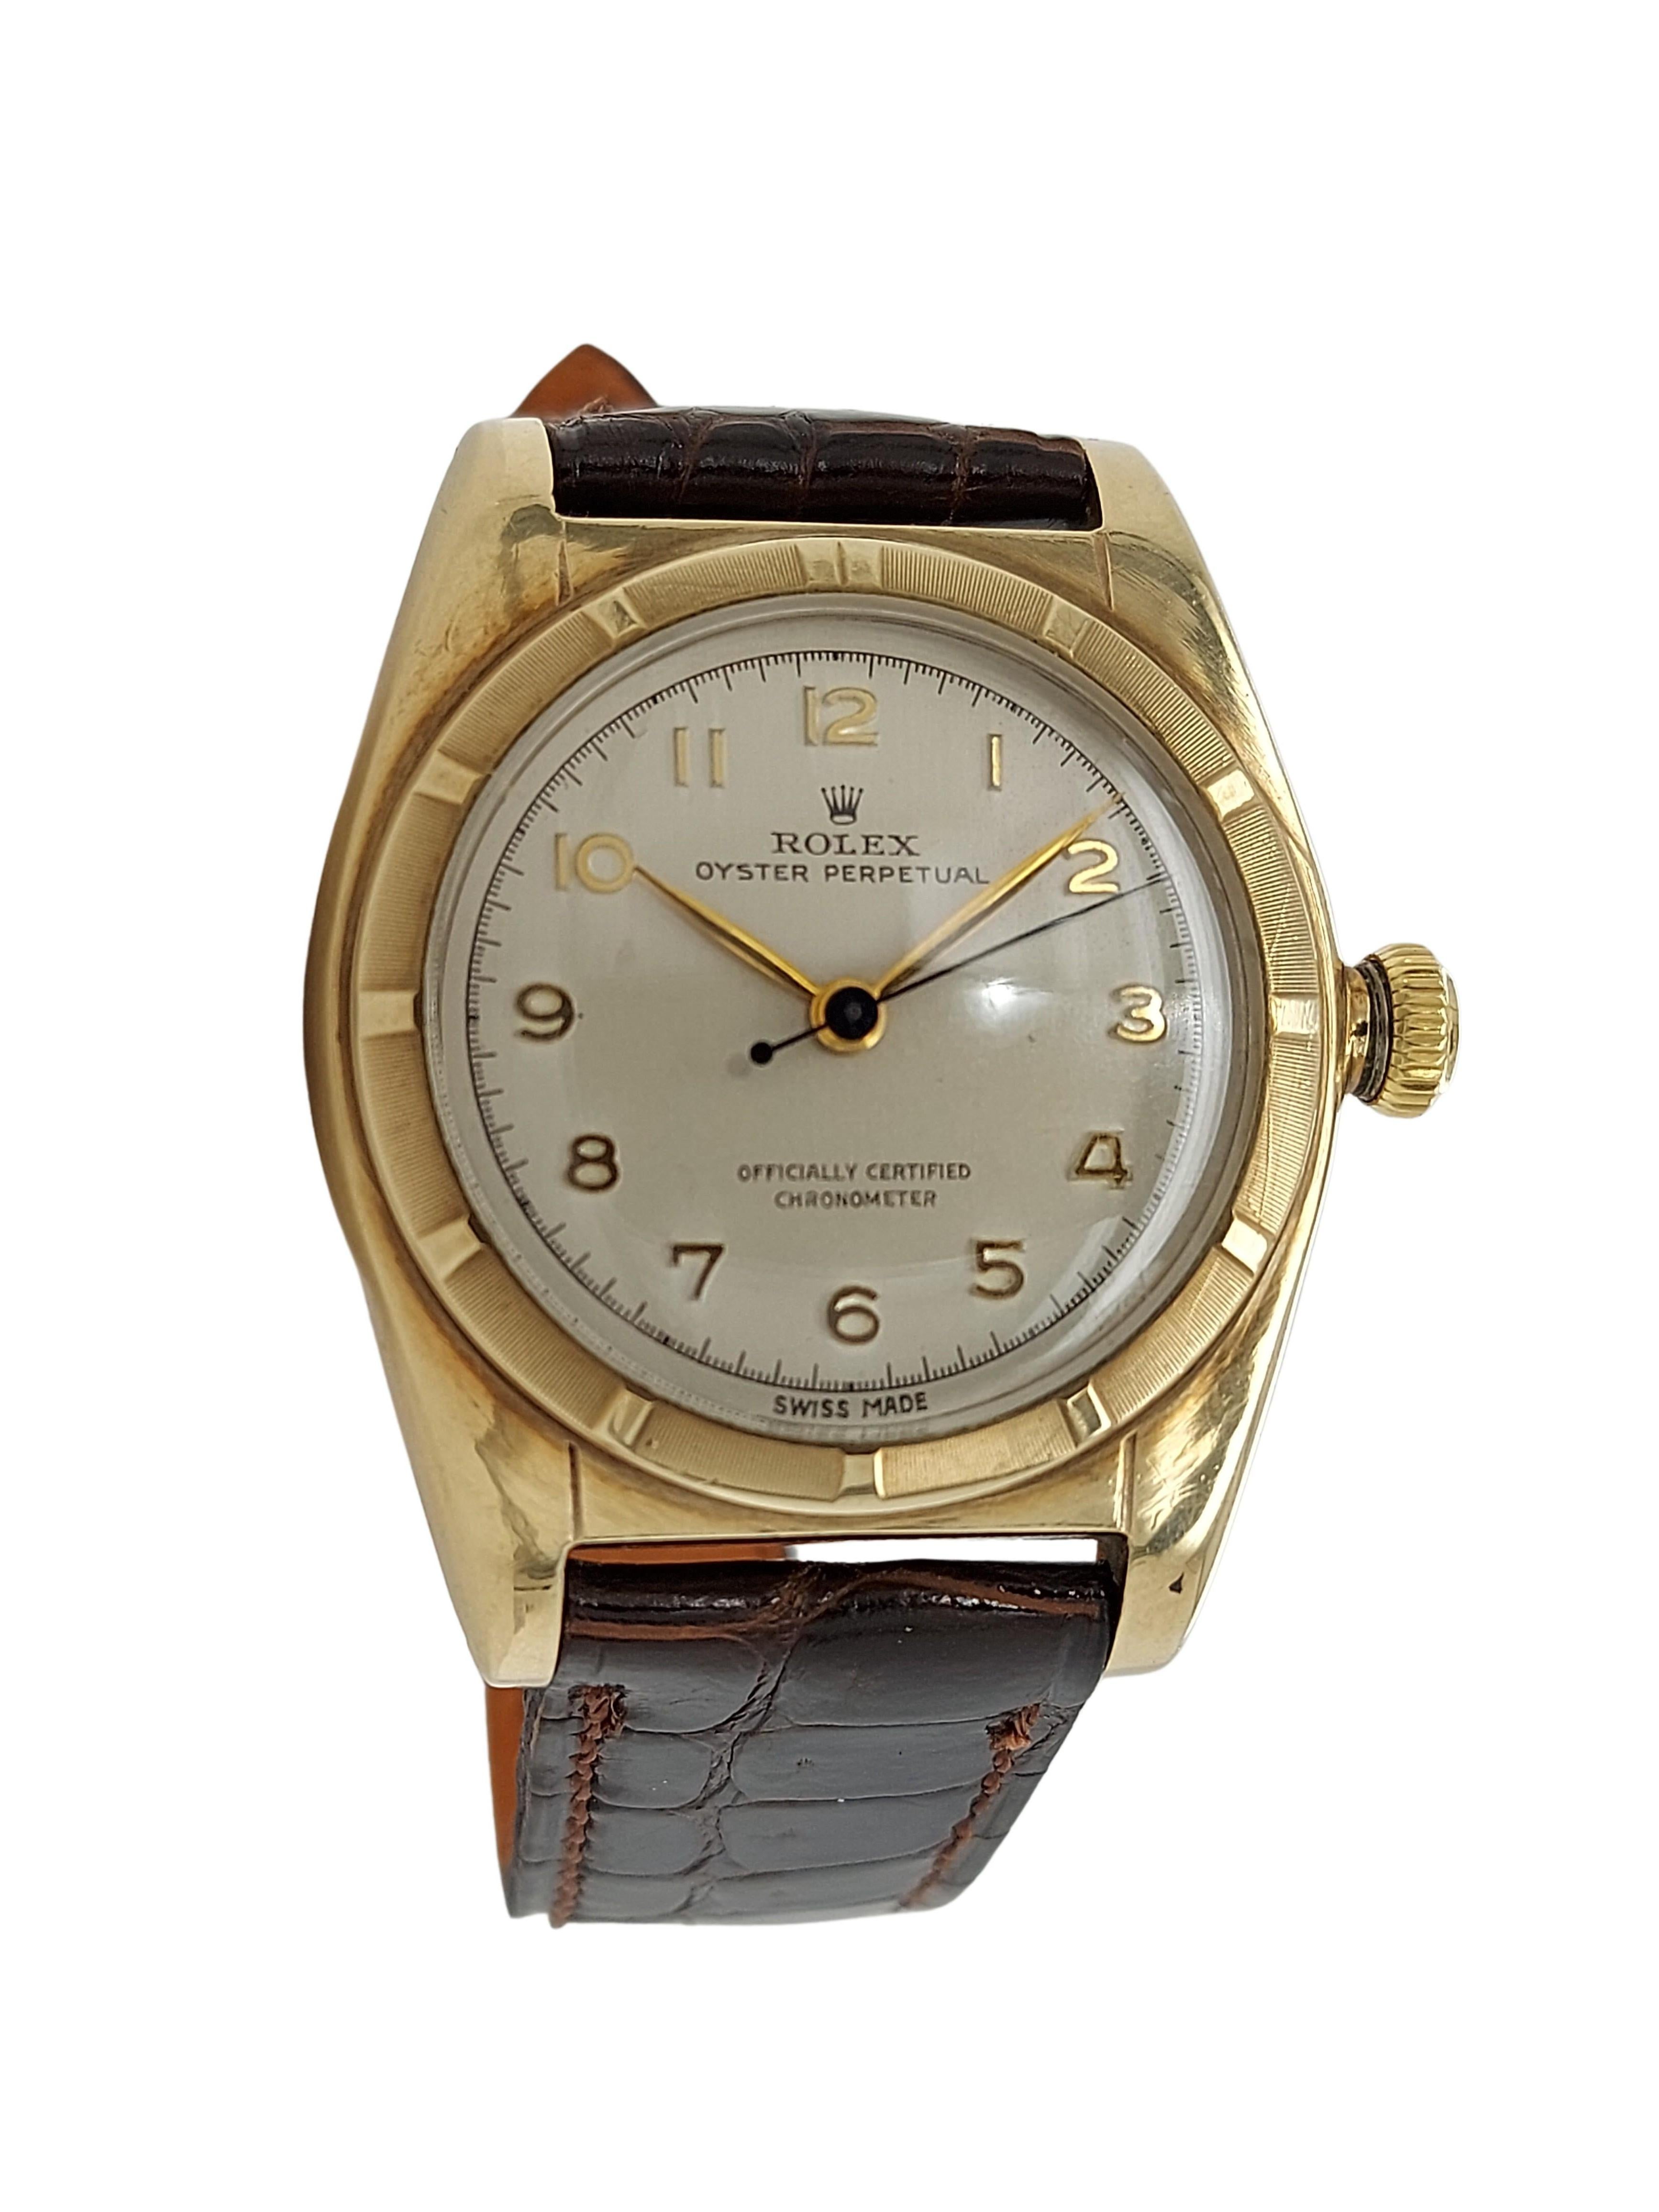 Artisan Rolex Oyster Perpetual Bubble Back Reference 5011, Automatic